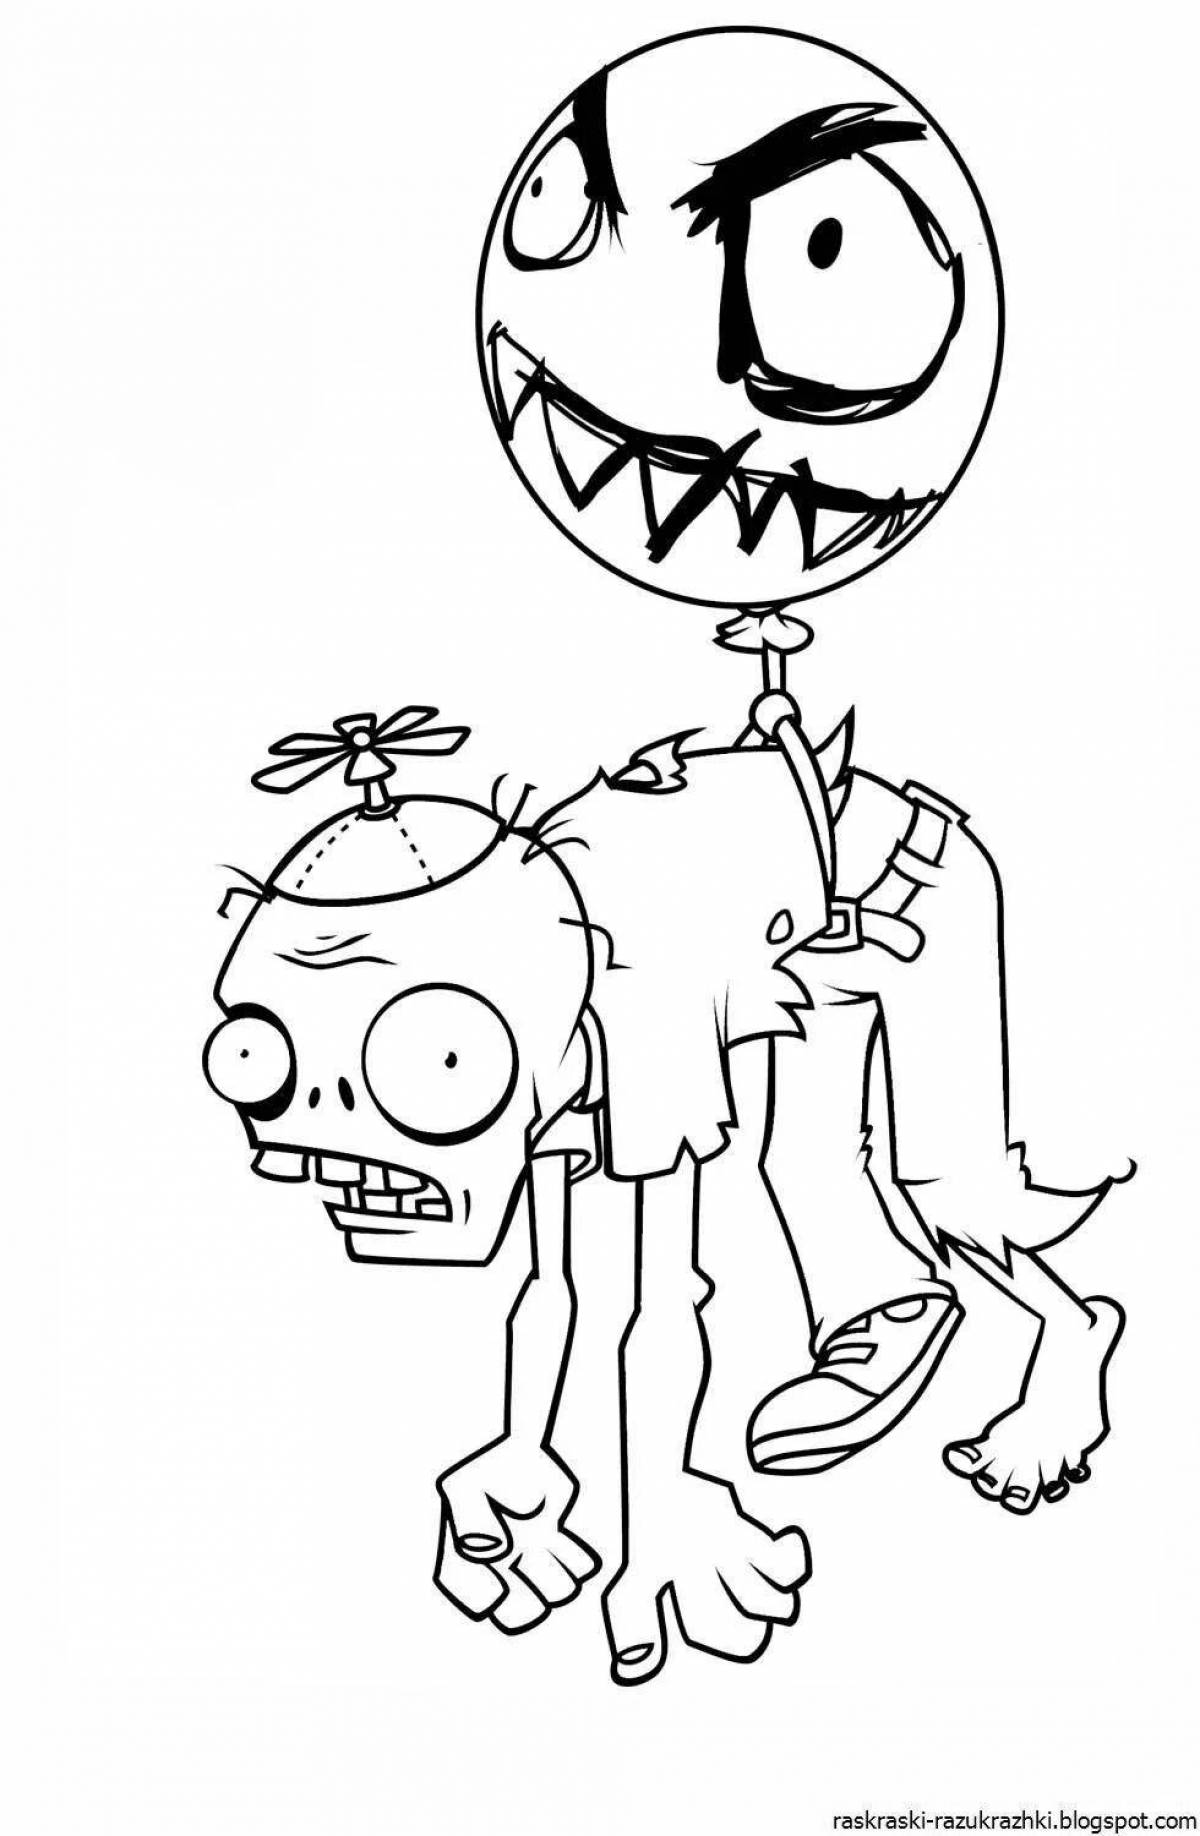 Terrifying zombie coloring pages for kids